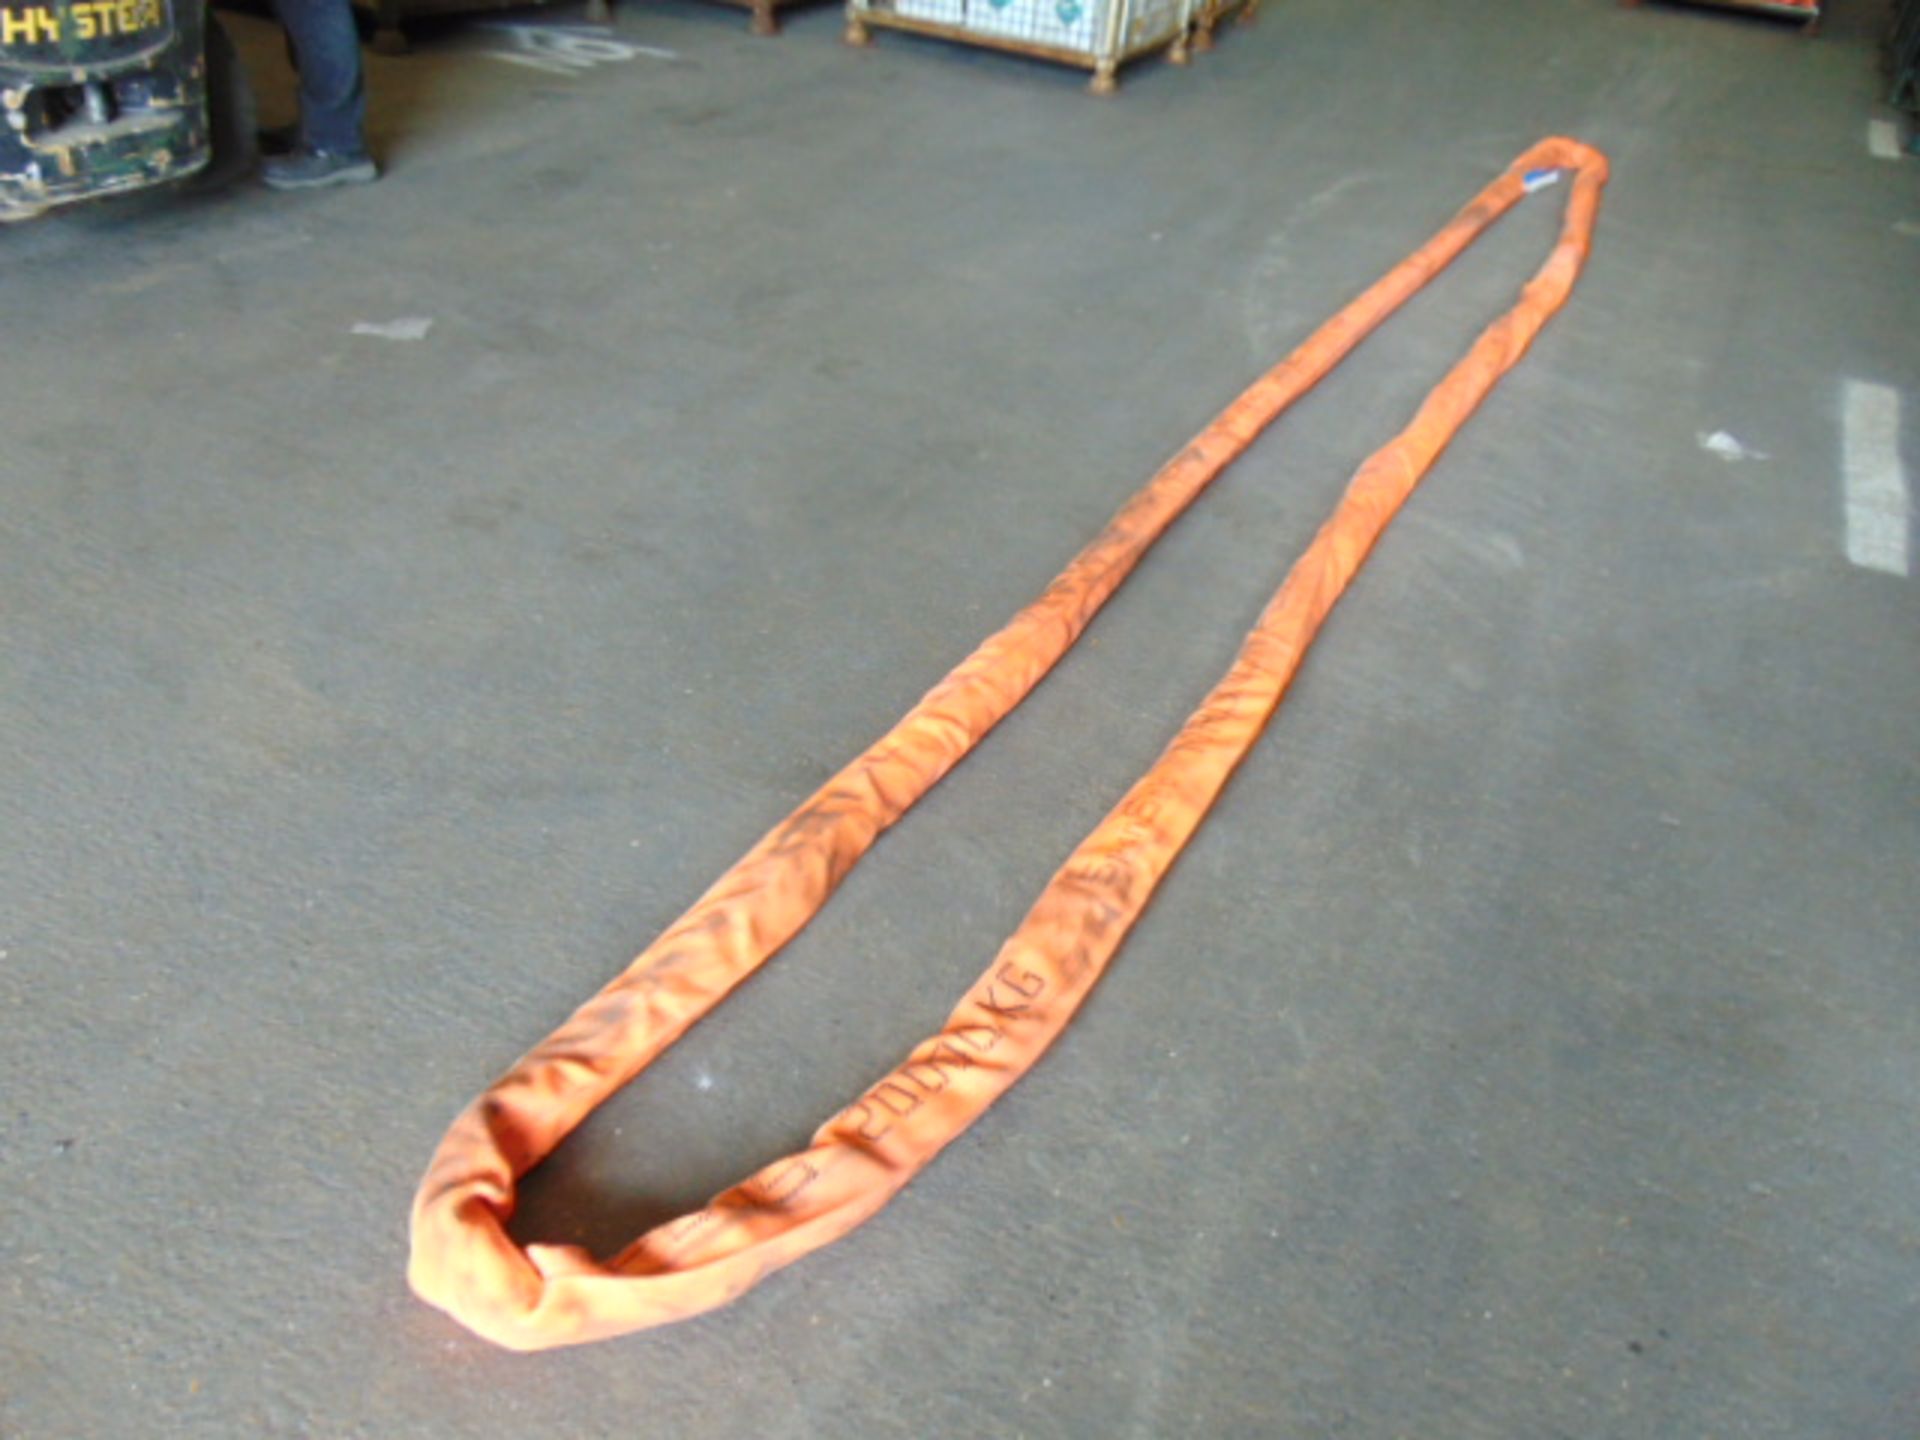 SpanSet Magnum 20,000kg Lifting/Recovery Strop from MOD - Bild 2 aus 5